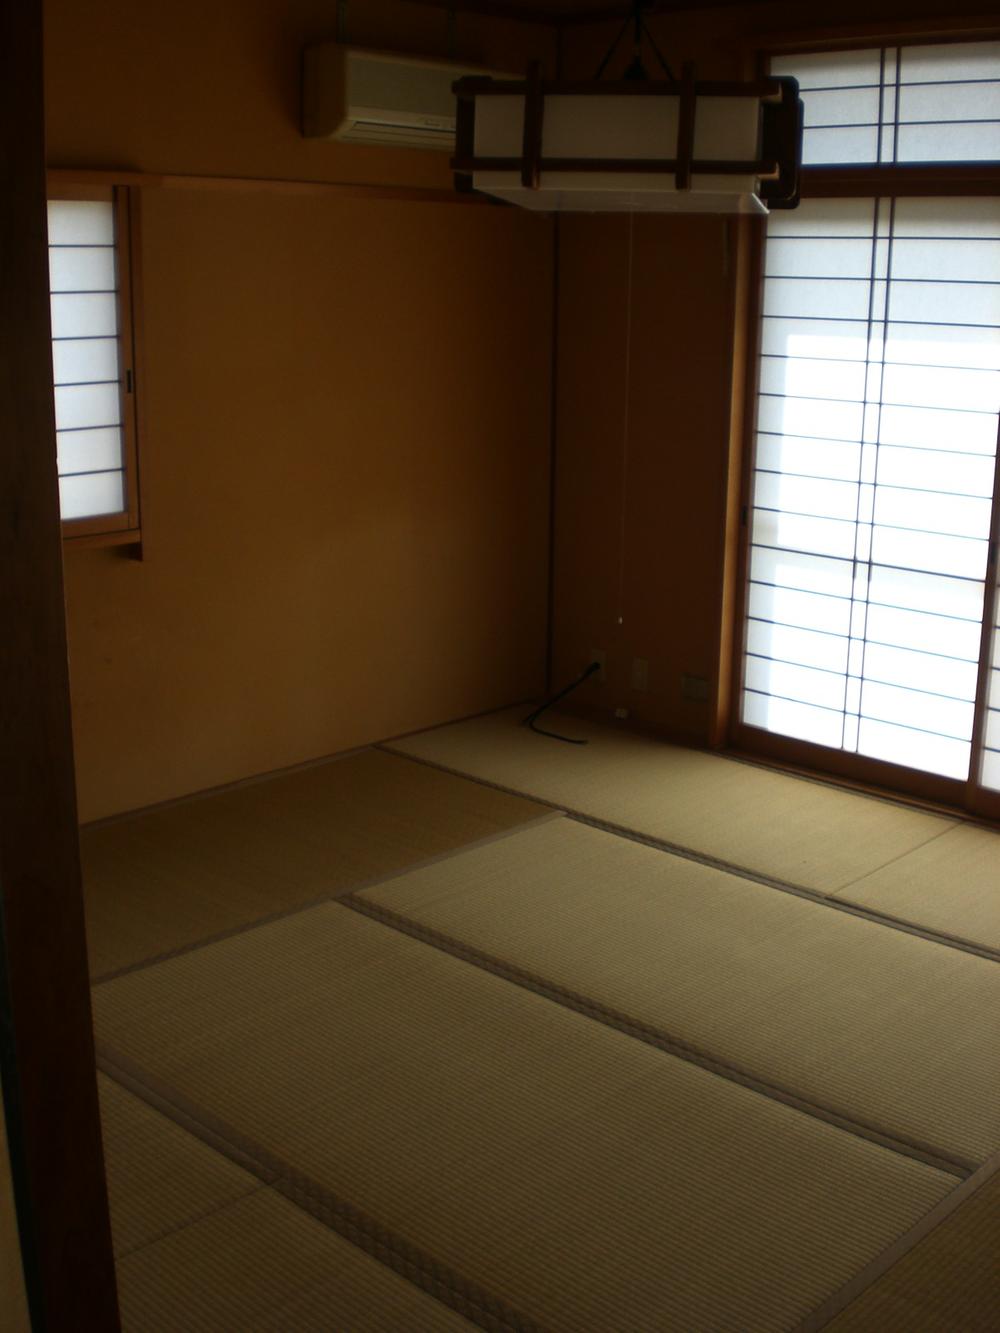 Non-living room. There are Japanese-style room